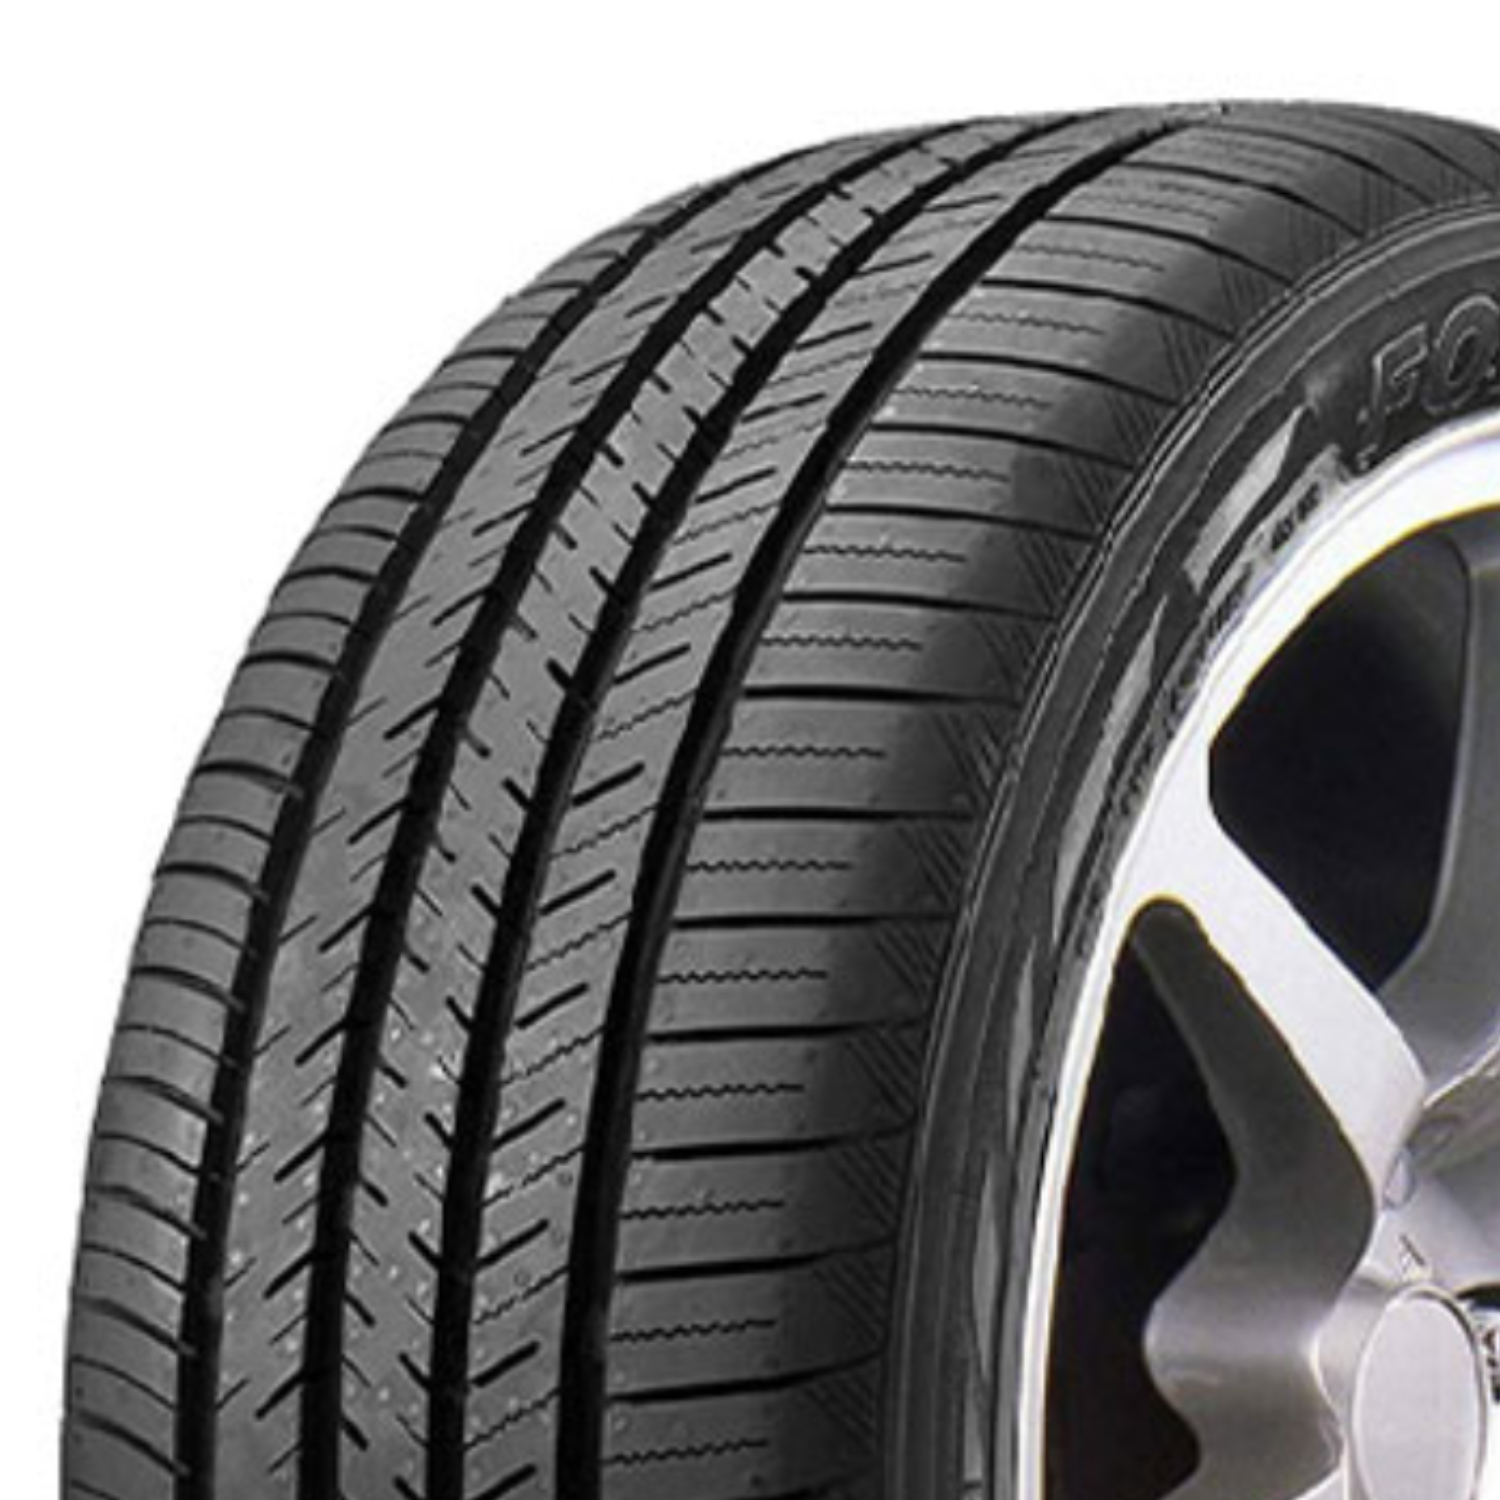 Atlas ATLAS FORCE UHP 255/50R20 109Y 520 AA A BSW SUMMER TIRE